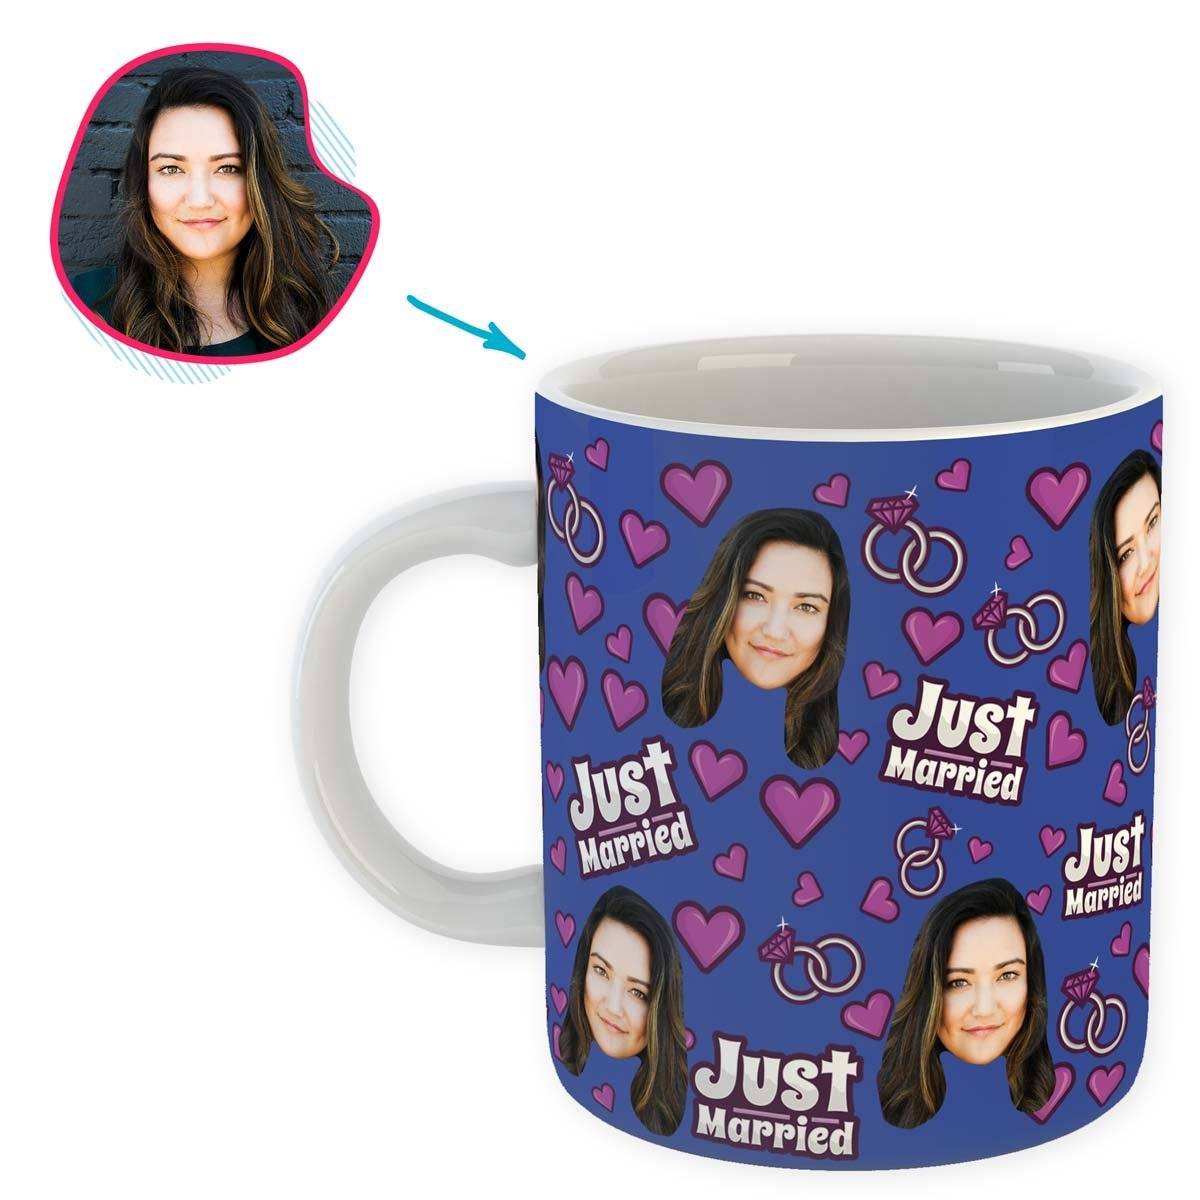 darkblue Just Married mug personalized with photo of face printed on it